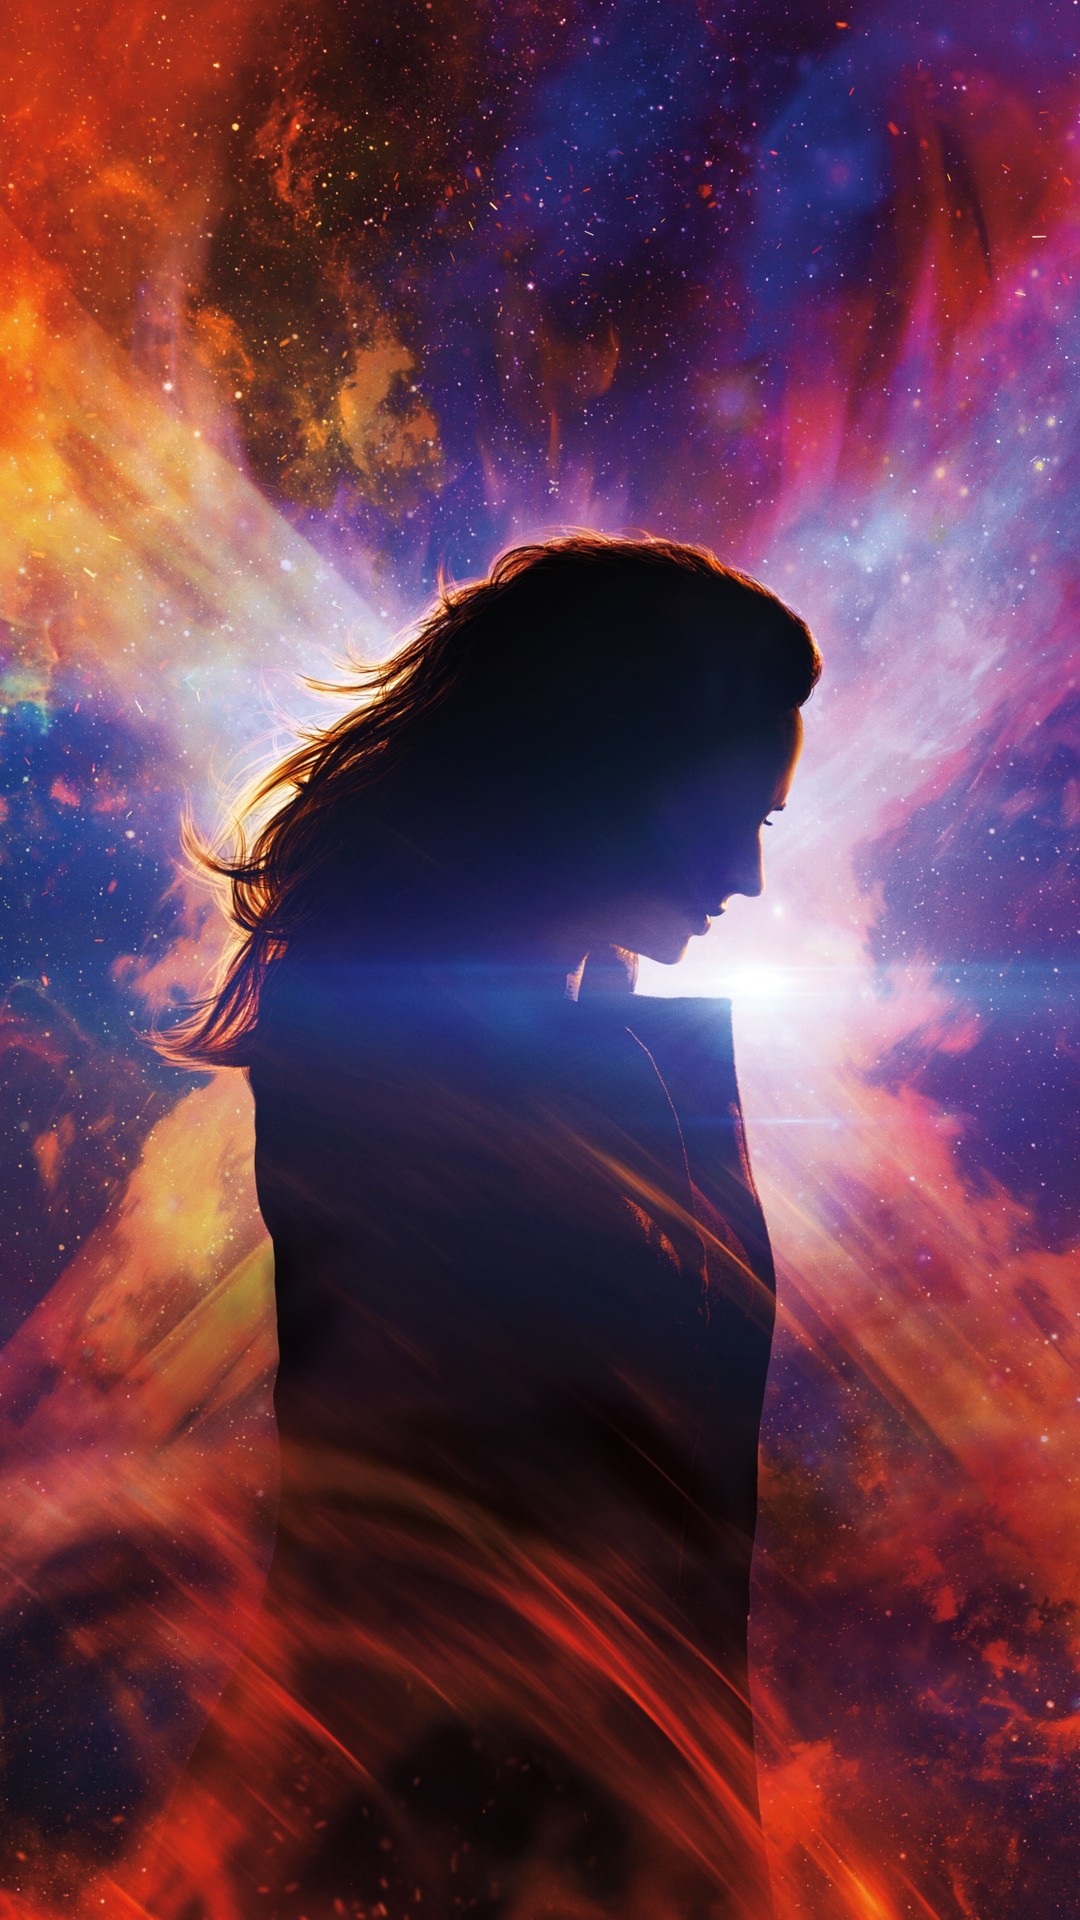 Dark Phoenix Poster HD with high-resolution 1080x1920 pixel. You can use this poster wallpaper for your Desktop Computers, Mac Screensavers, Windows Backgrounds, iPhone Wallpapers, Tablet or Android Lock screen and another Mobile device